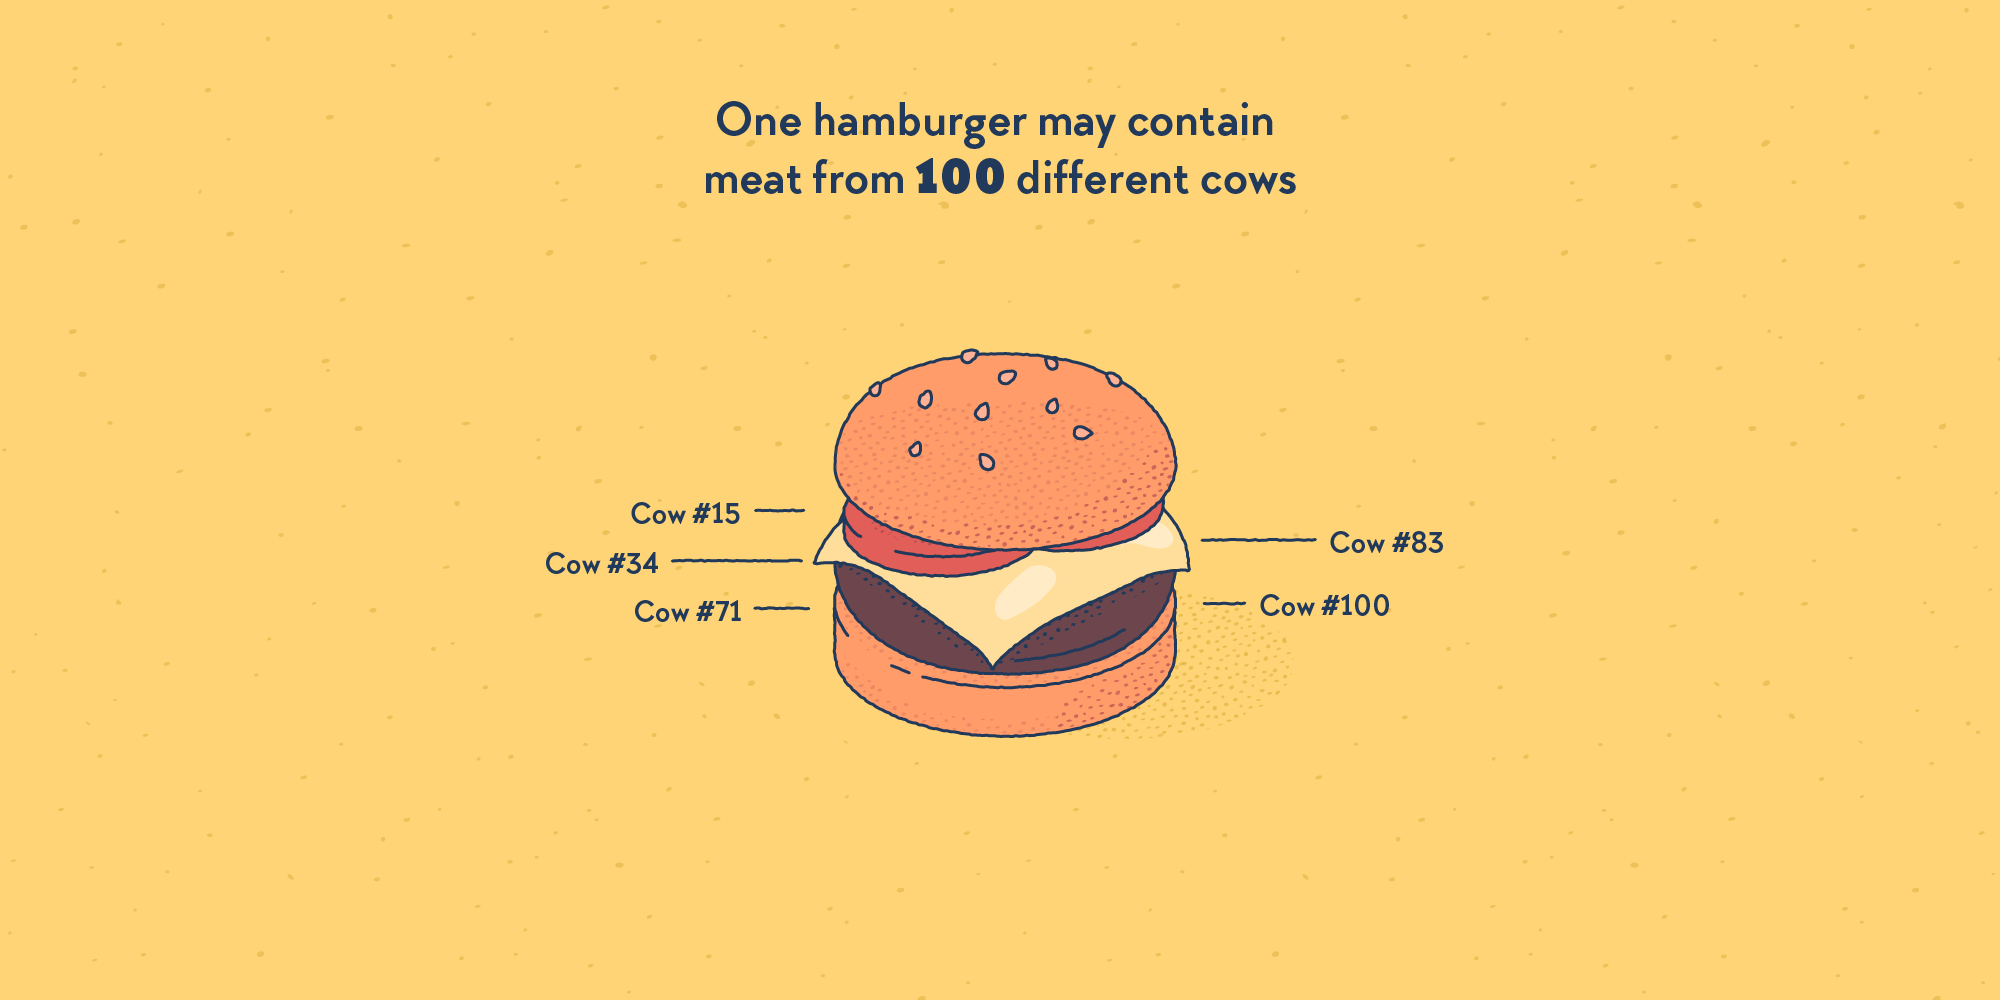 A hamburger, surounded by little captions indicating “Cow number 15”, “Cow number 34”, “Cow number 72”, etc.